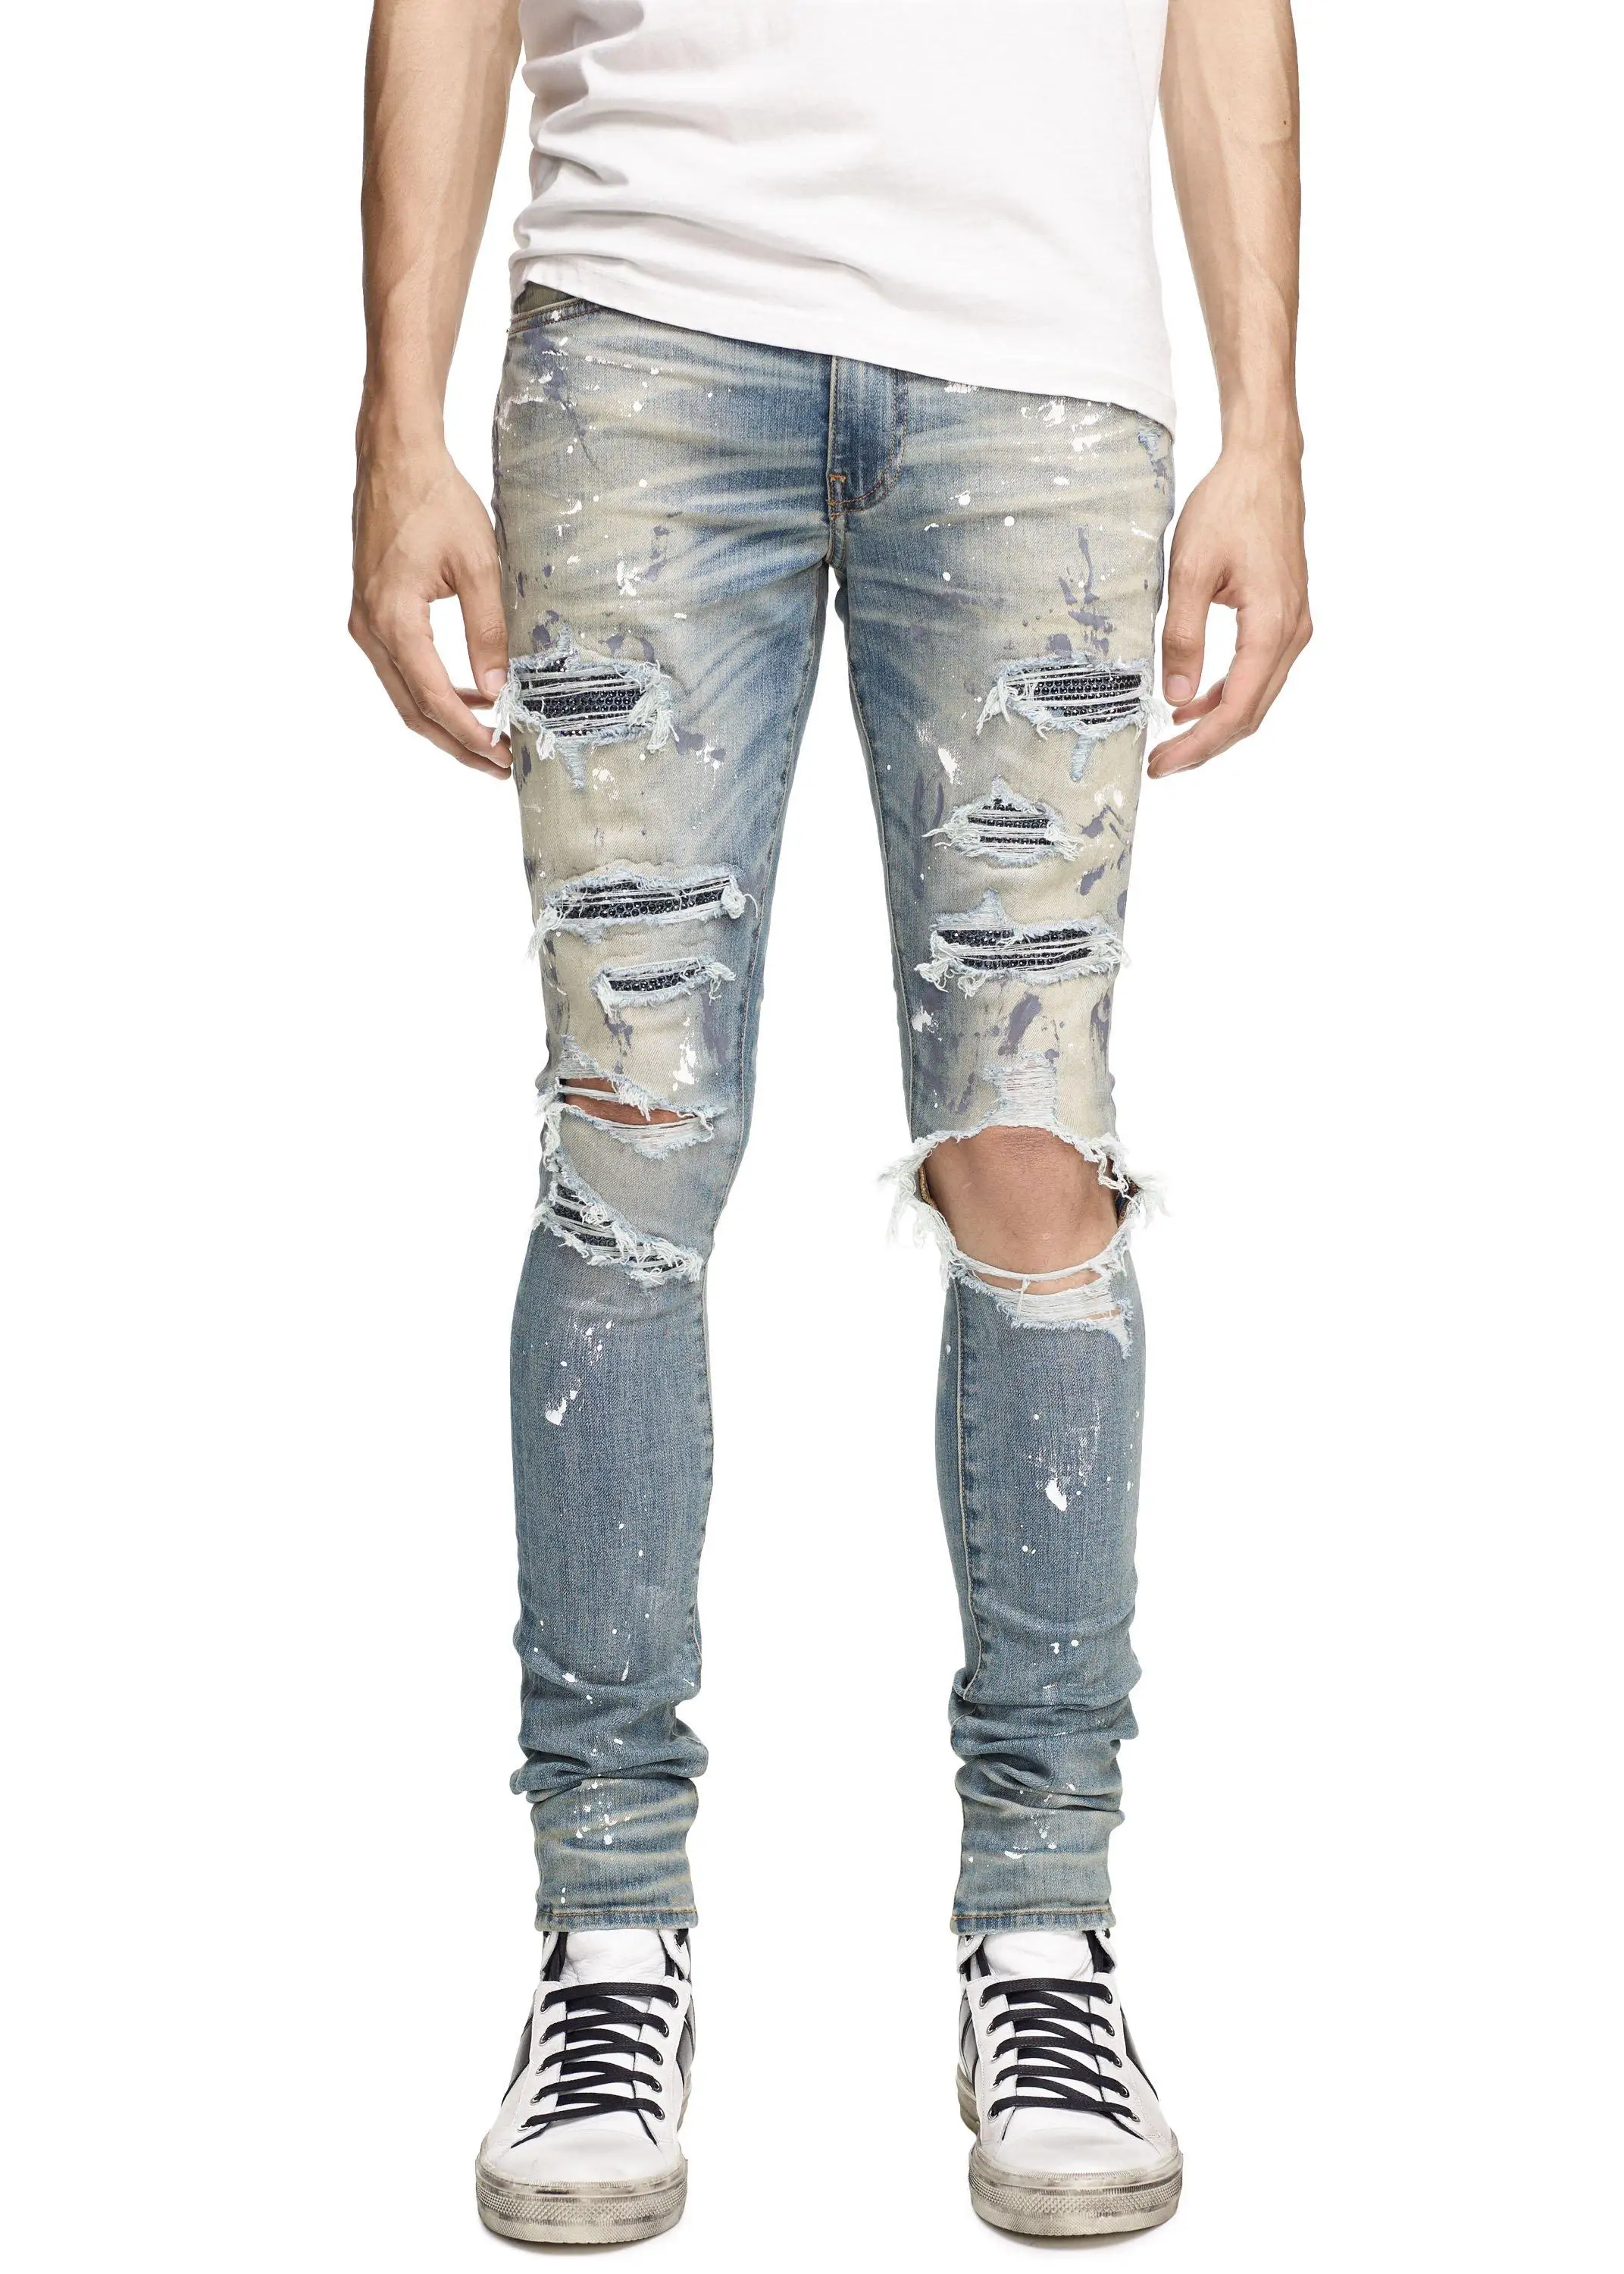 Diznew Classic Indigo Crystal Paint Distressed Jeans For Men - Buy ...